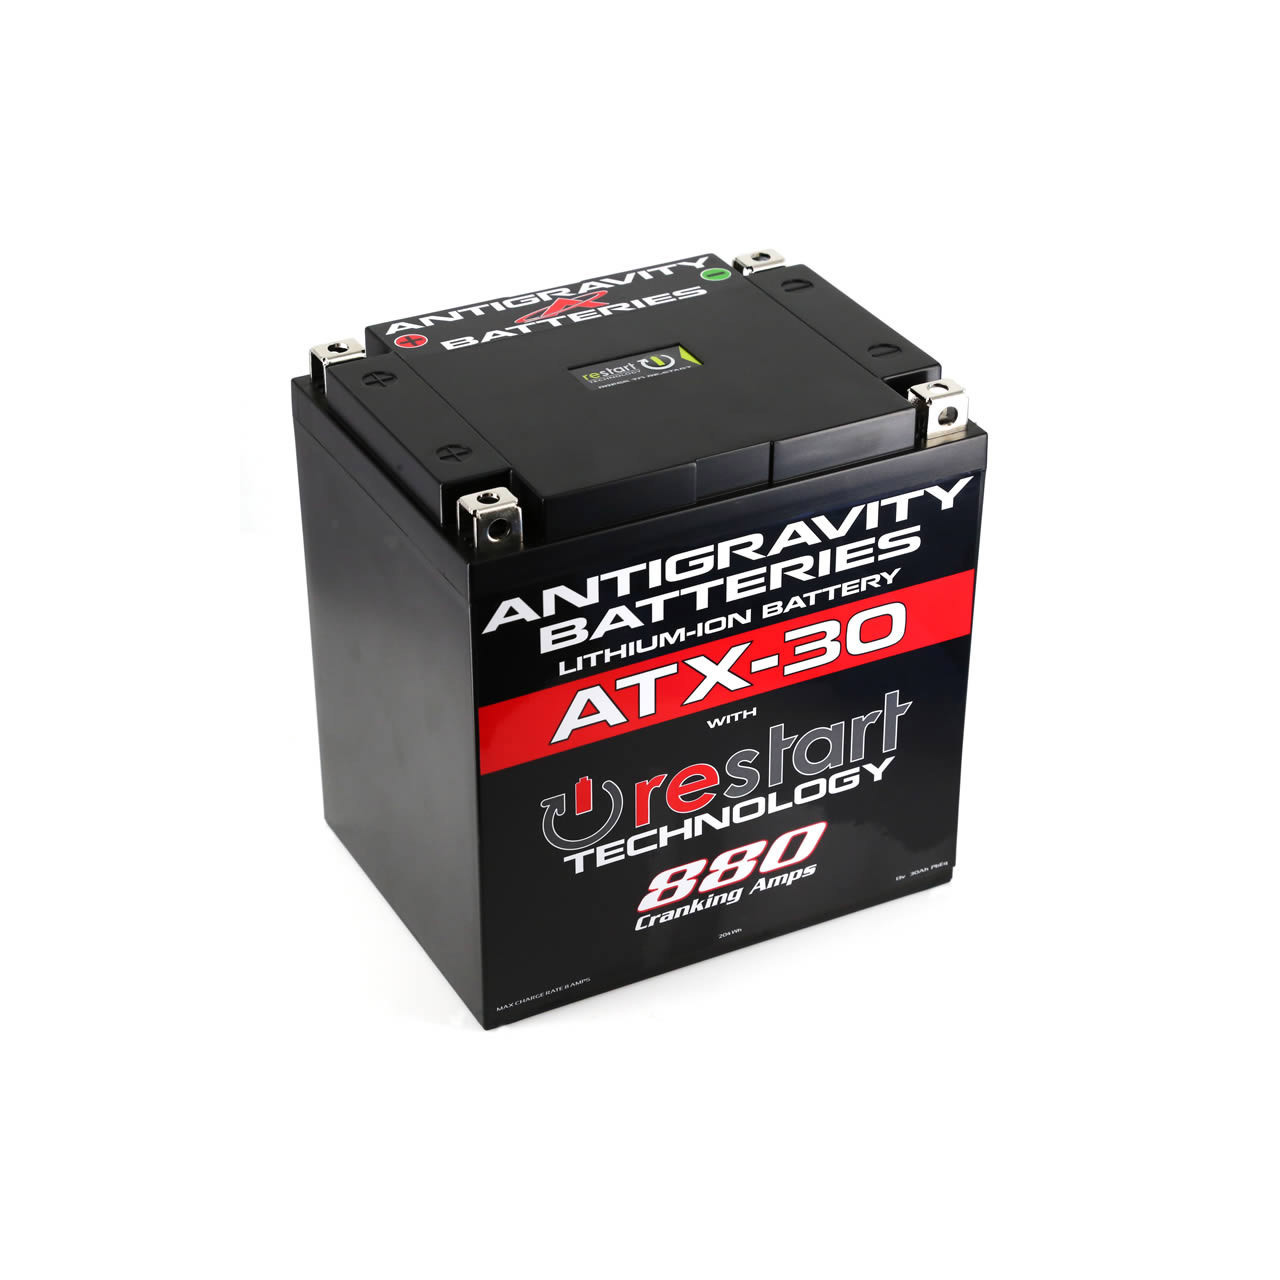 Antigravity Lithium Car Battery - ATX30-Re-Start - Compact - 5.75 LBS